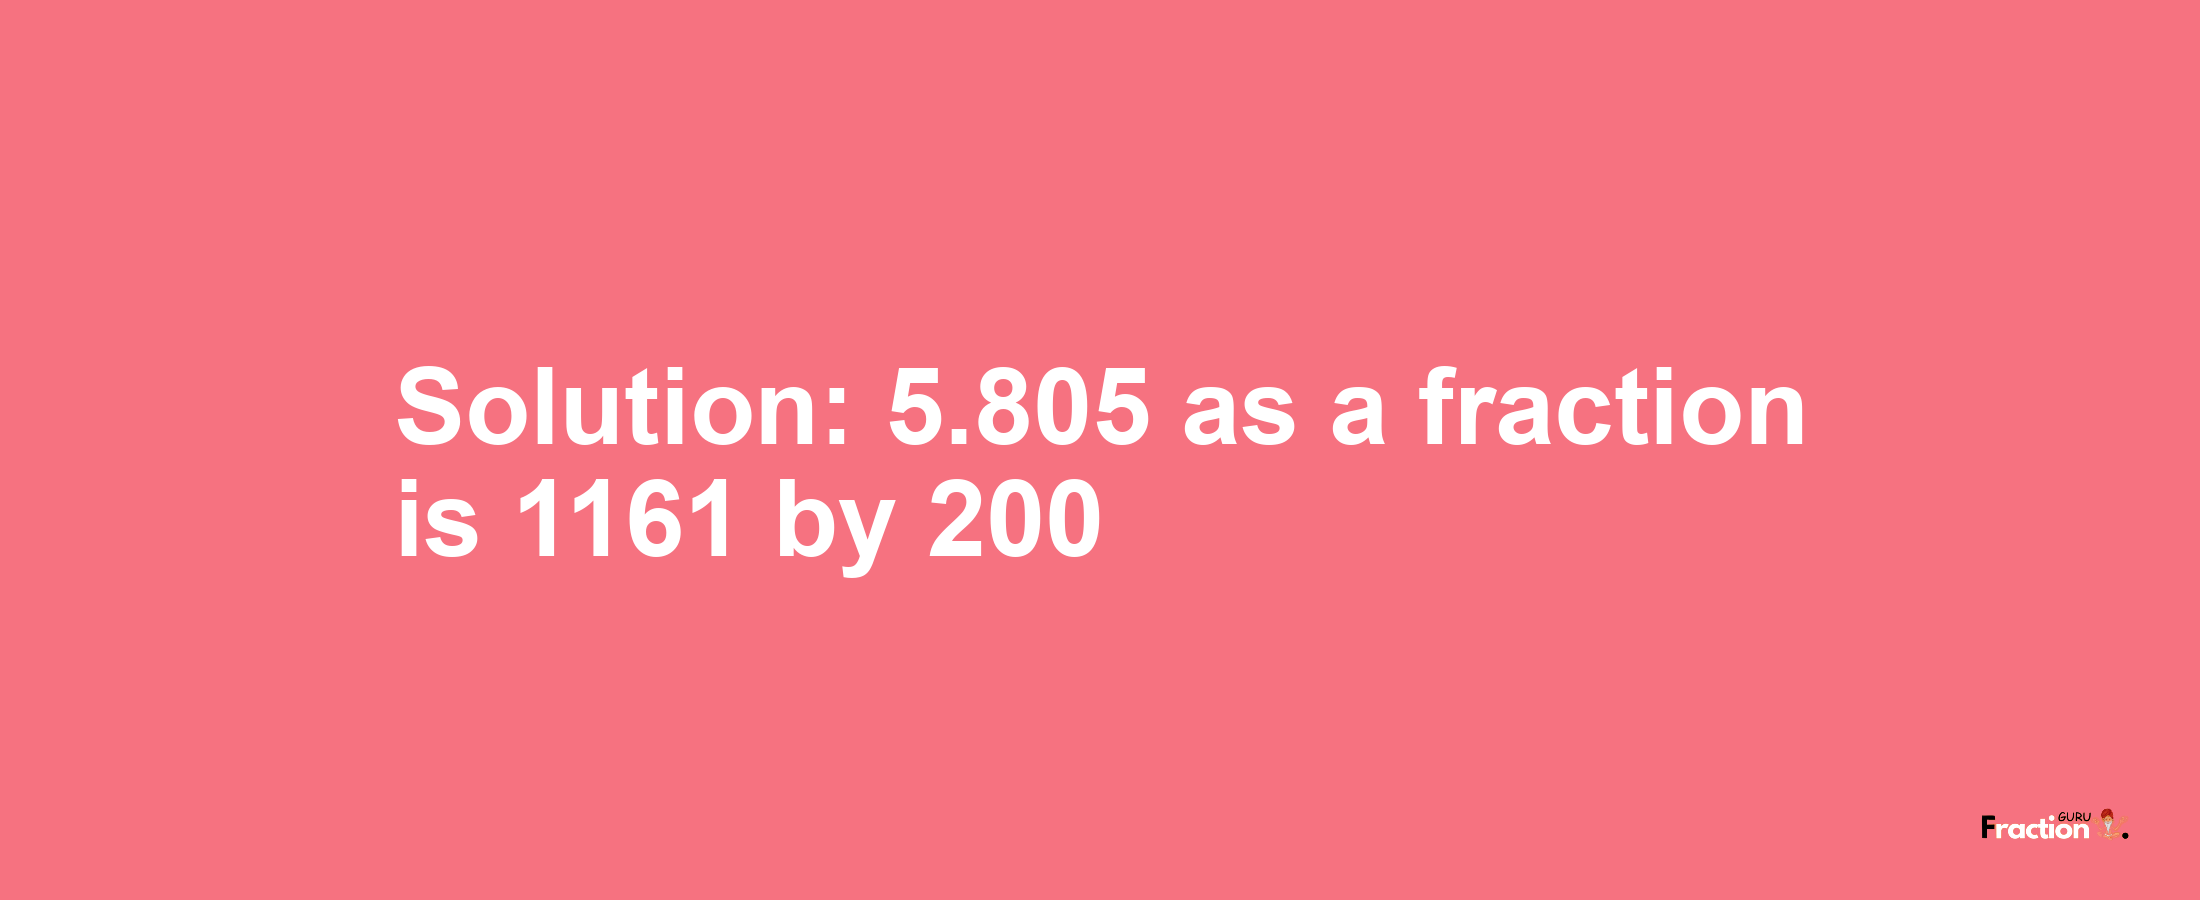 Solution:5.805 as a fraction is 1161/200